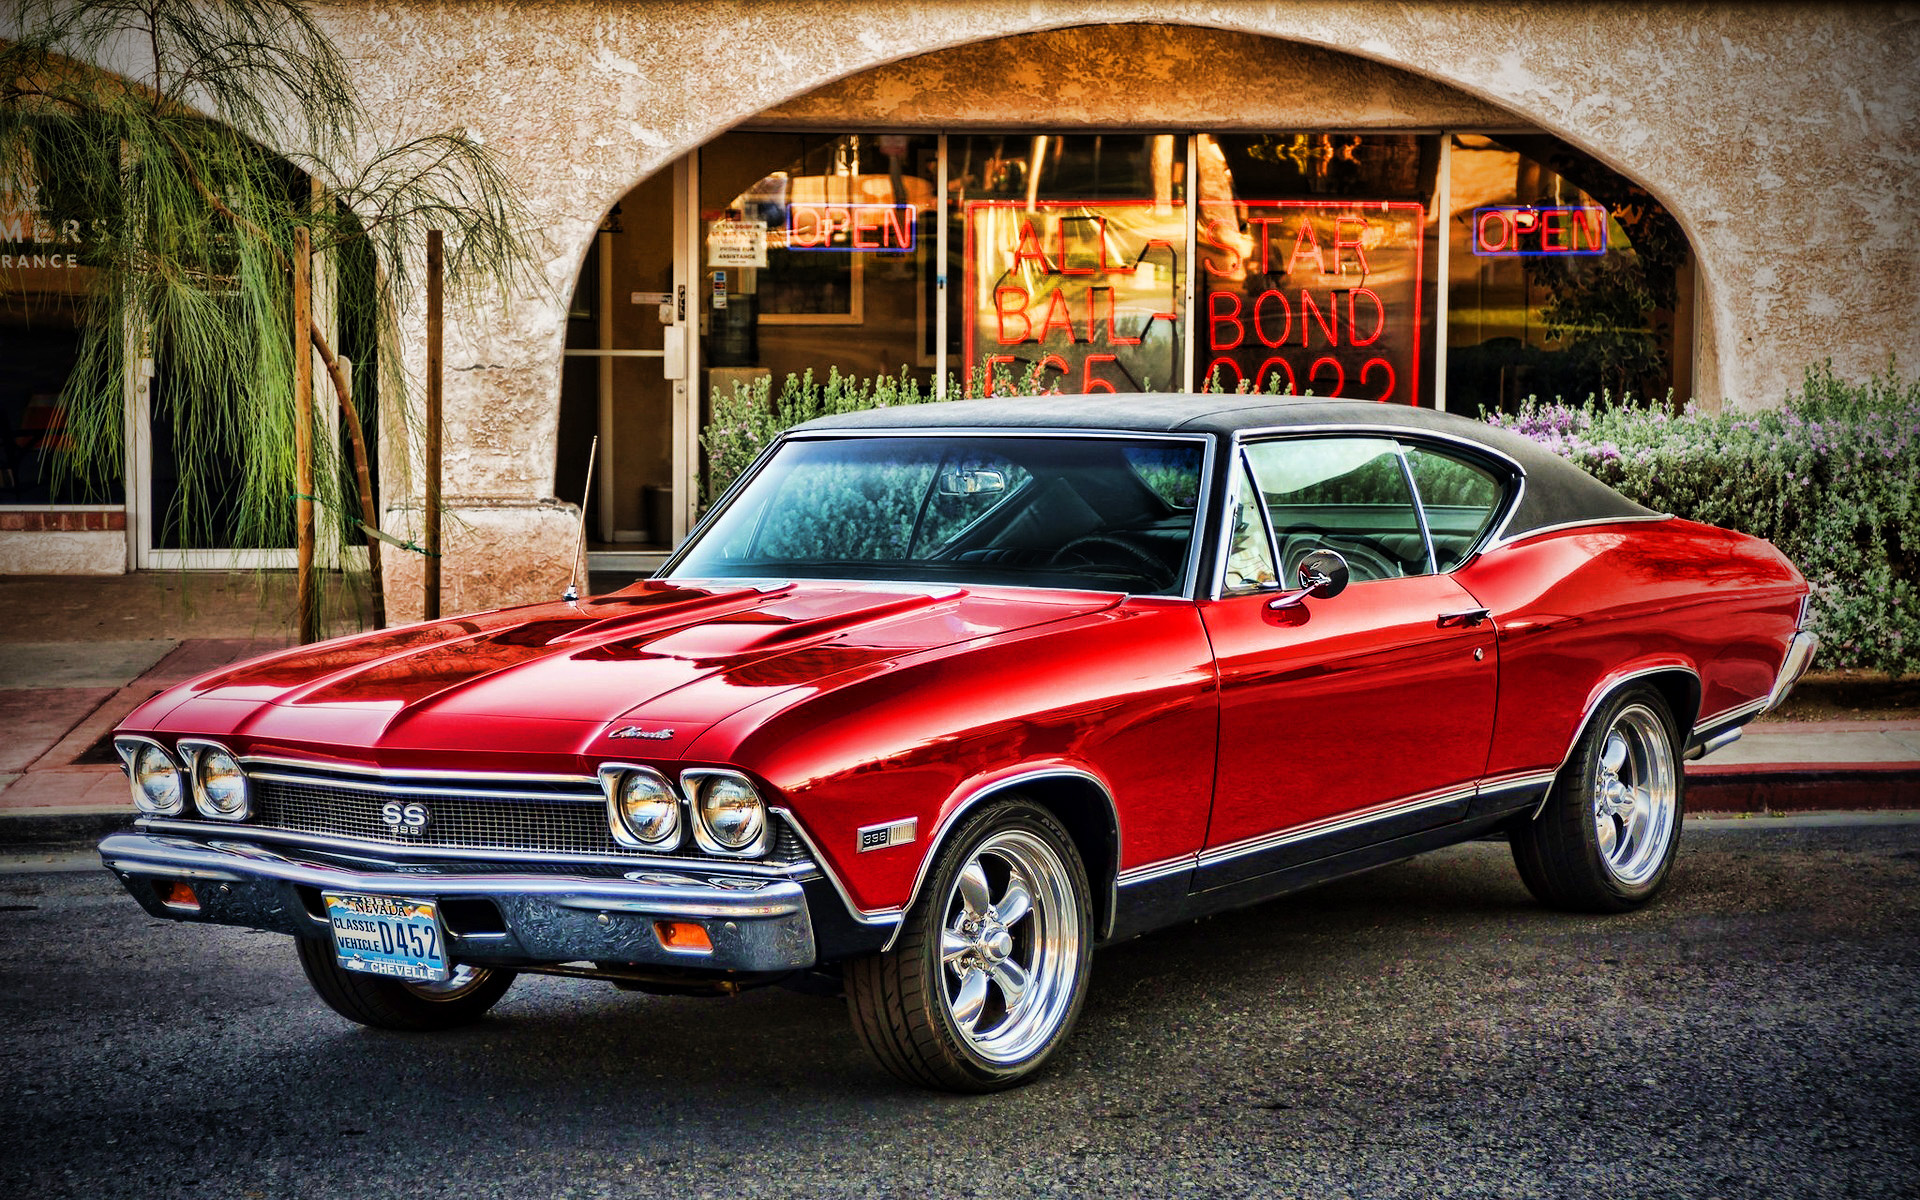 Chevrolet Chevelle muscle, 1968 vintage cars, HDR photography, American auto heritage, Timeless appeal, 1920x1200 HD Desktop